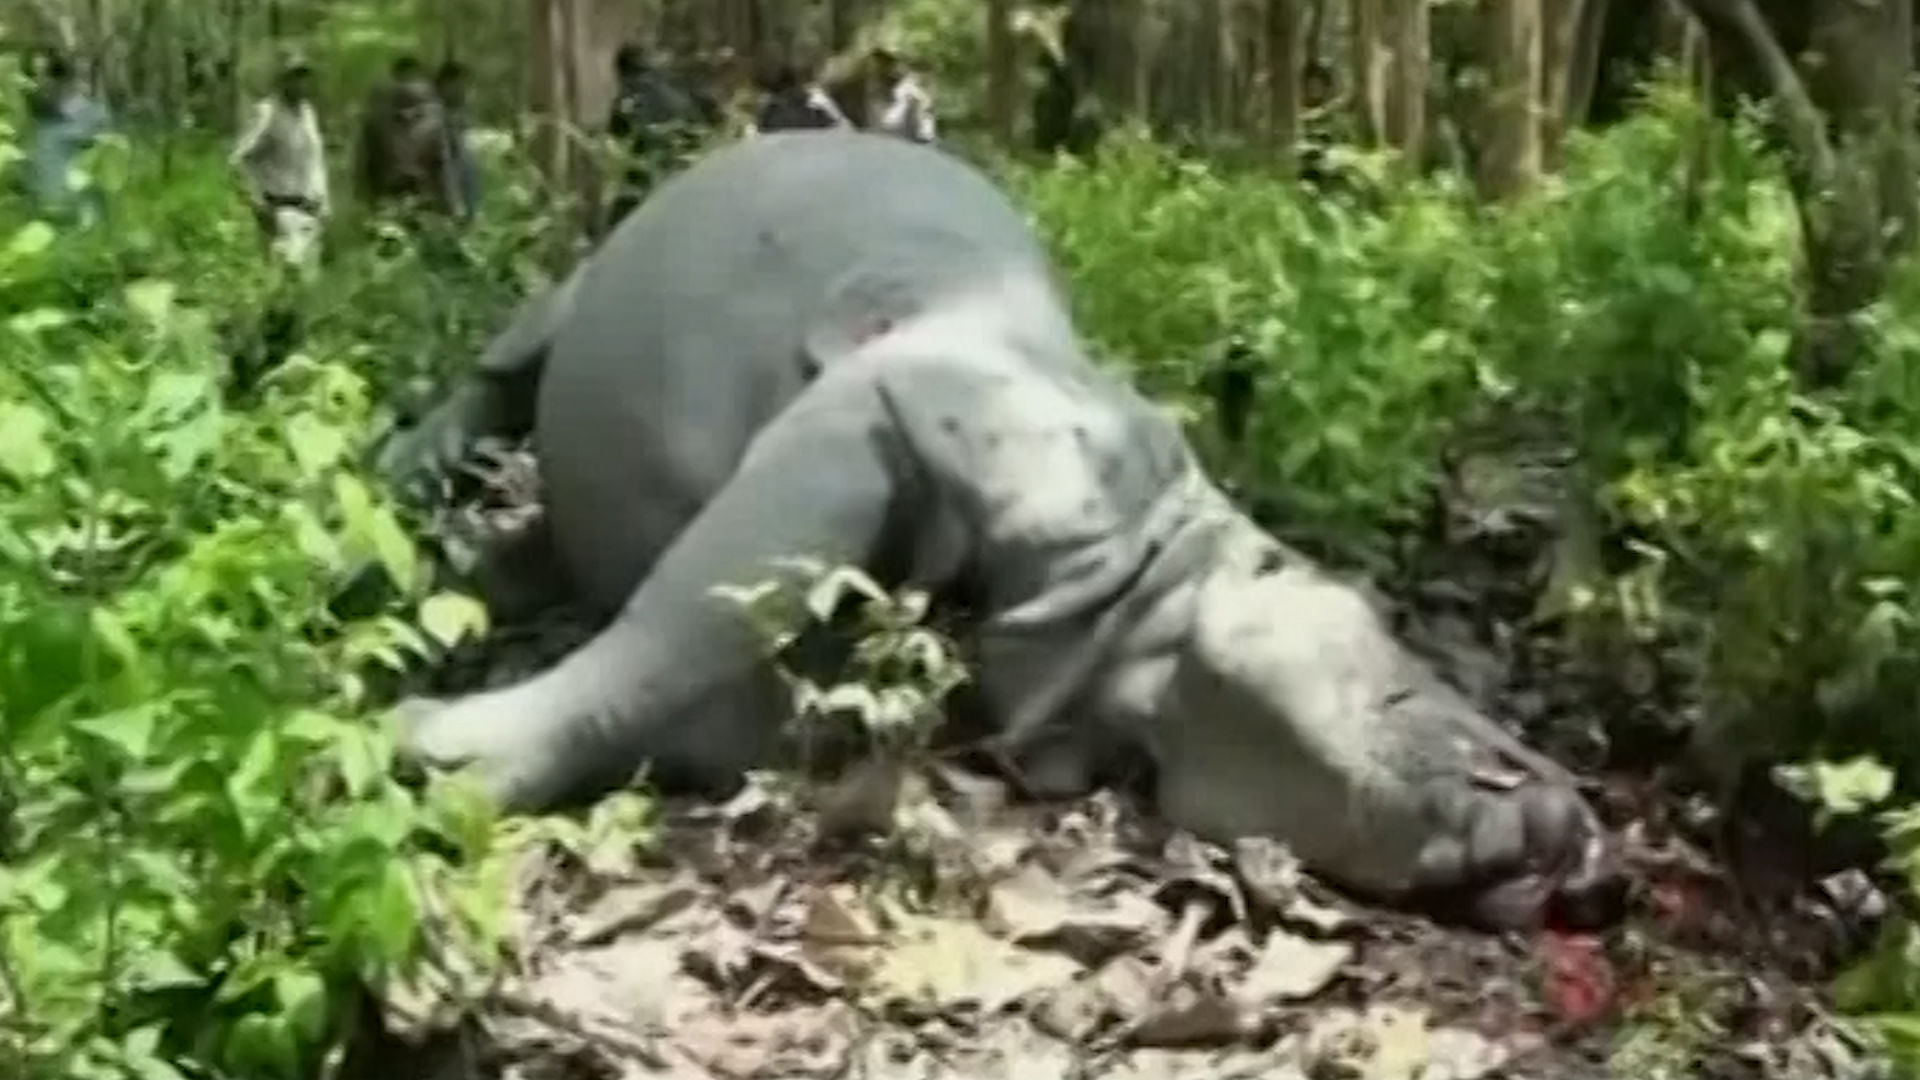 

An empty cartridge of an AK-47 assault rifle used to kill the rhino was found at the spot. (Photo: ANI Screengrab)&nbsp;